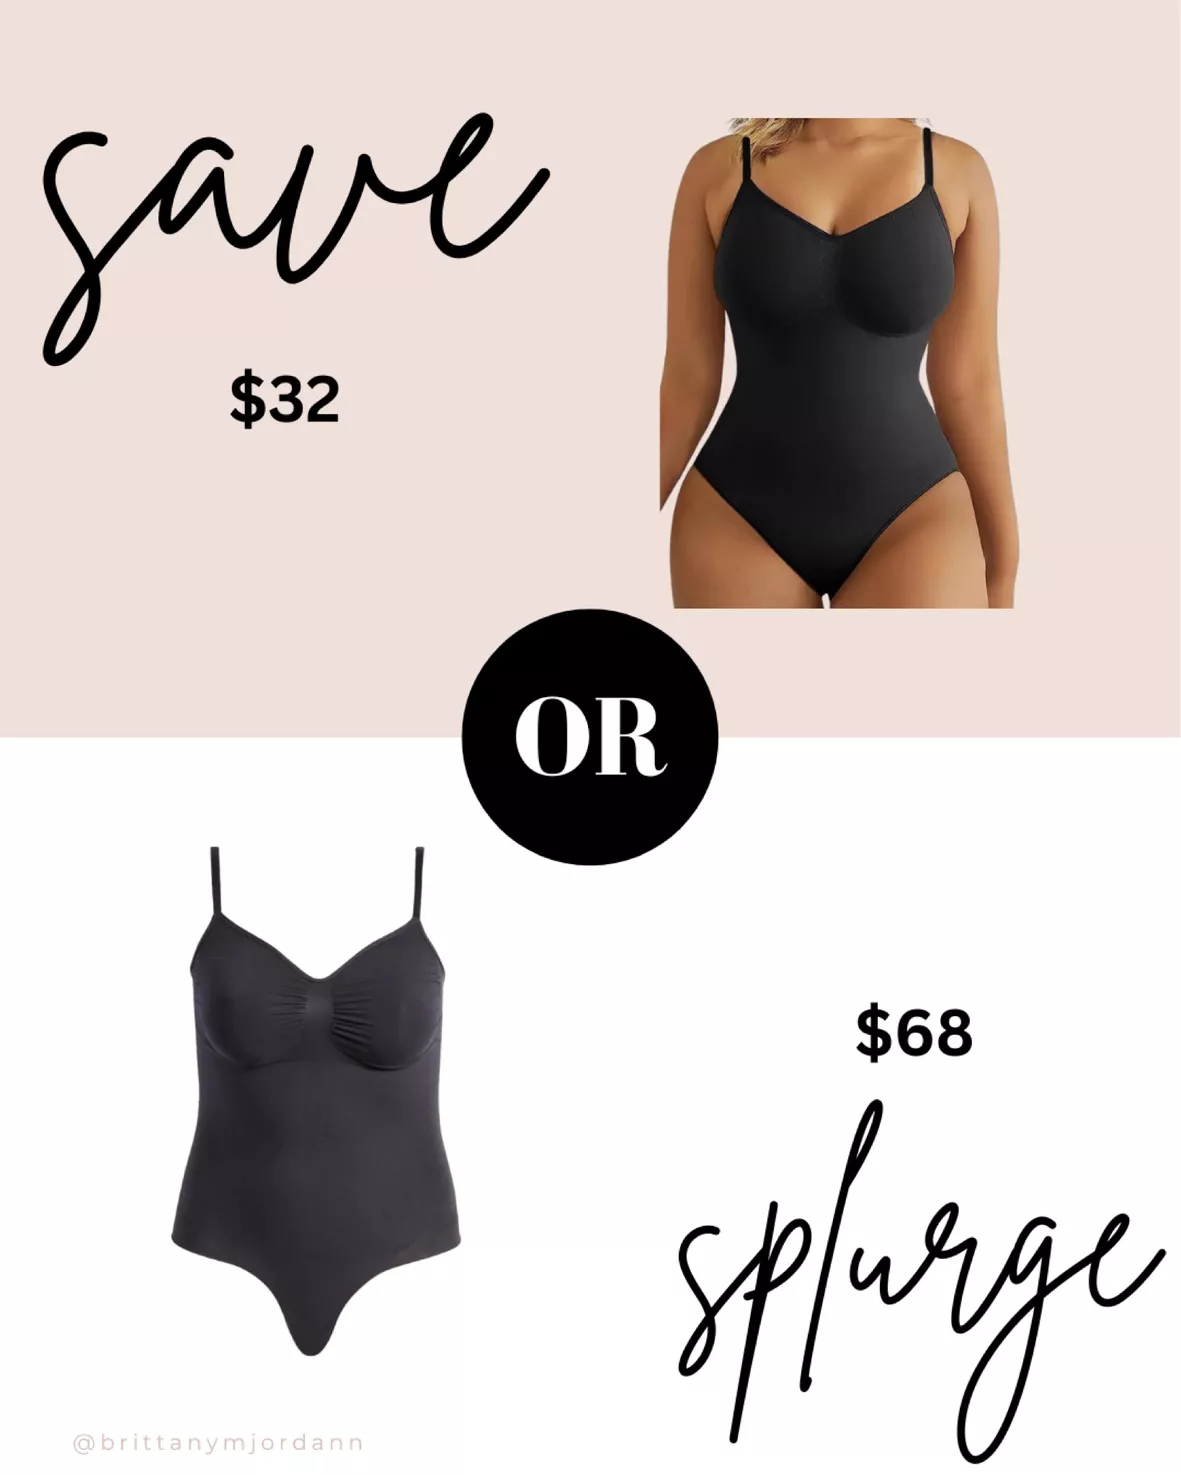 SEAMLESS SCULPT THONG BODYSUIT curated on LTK